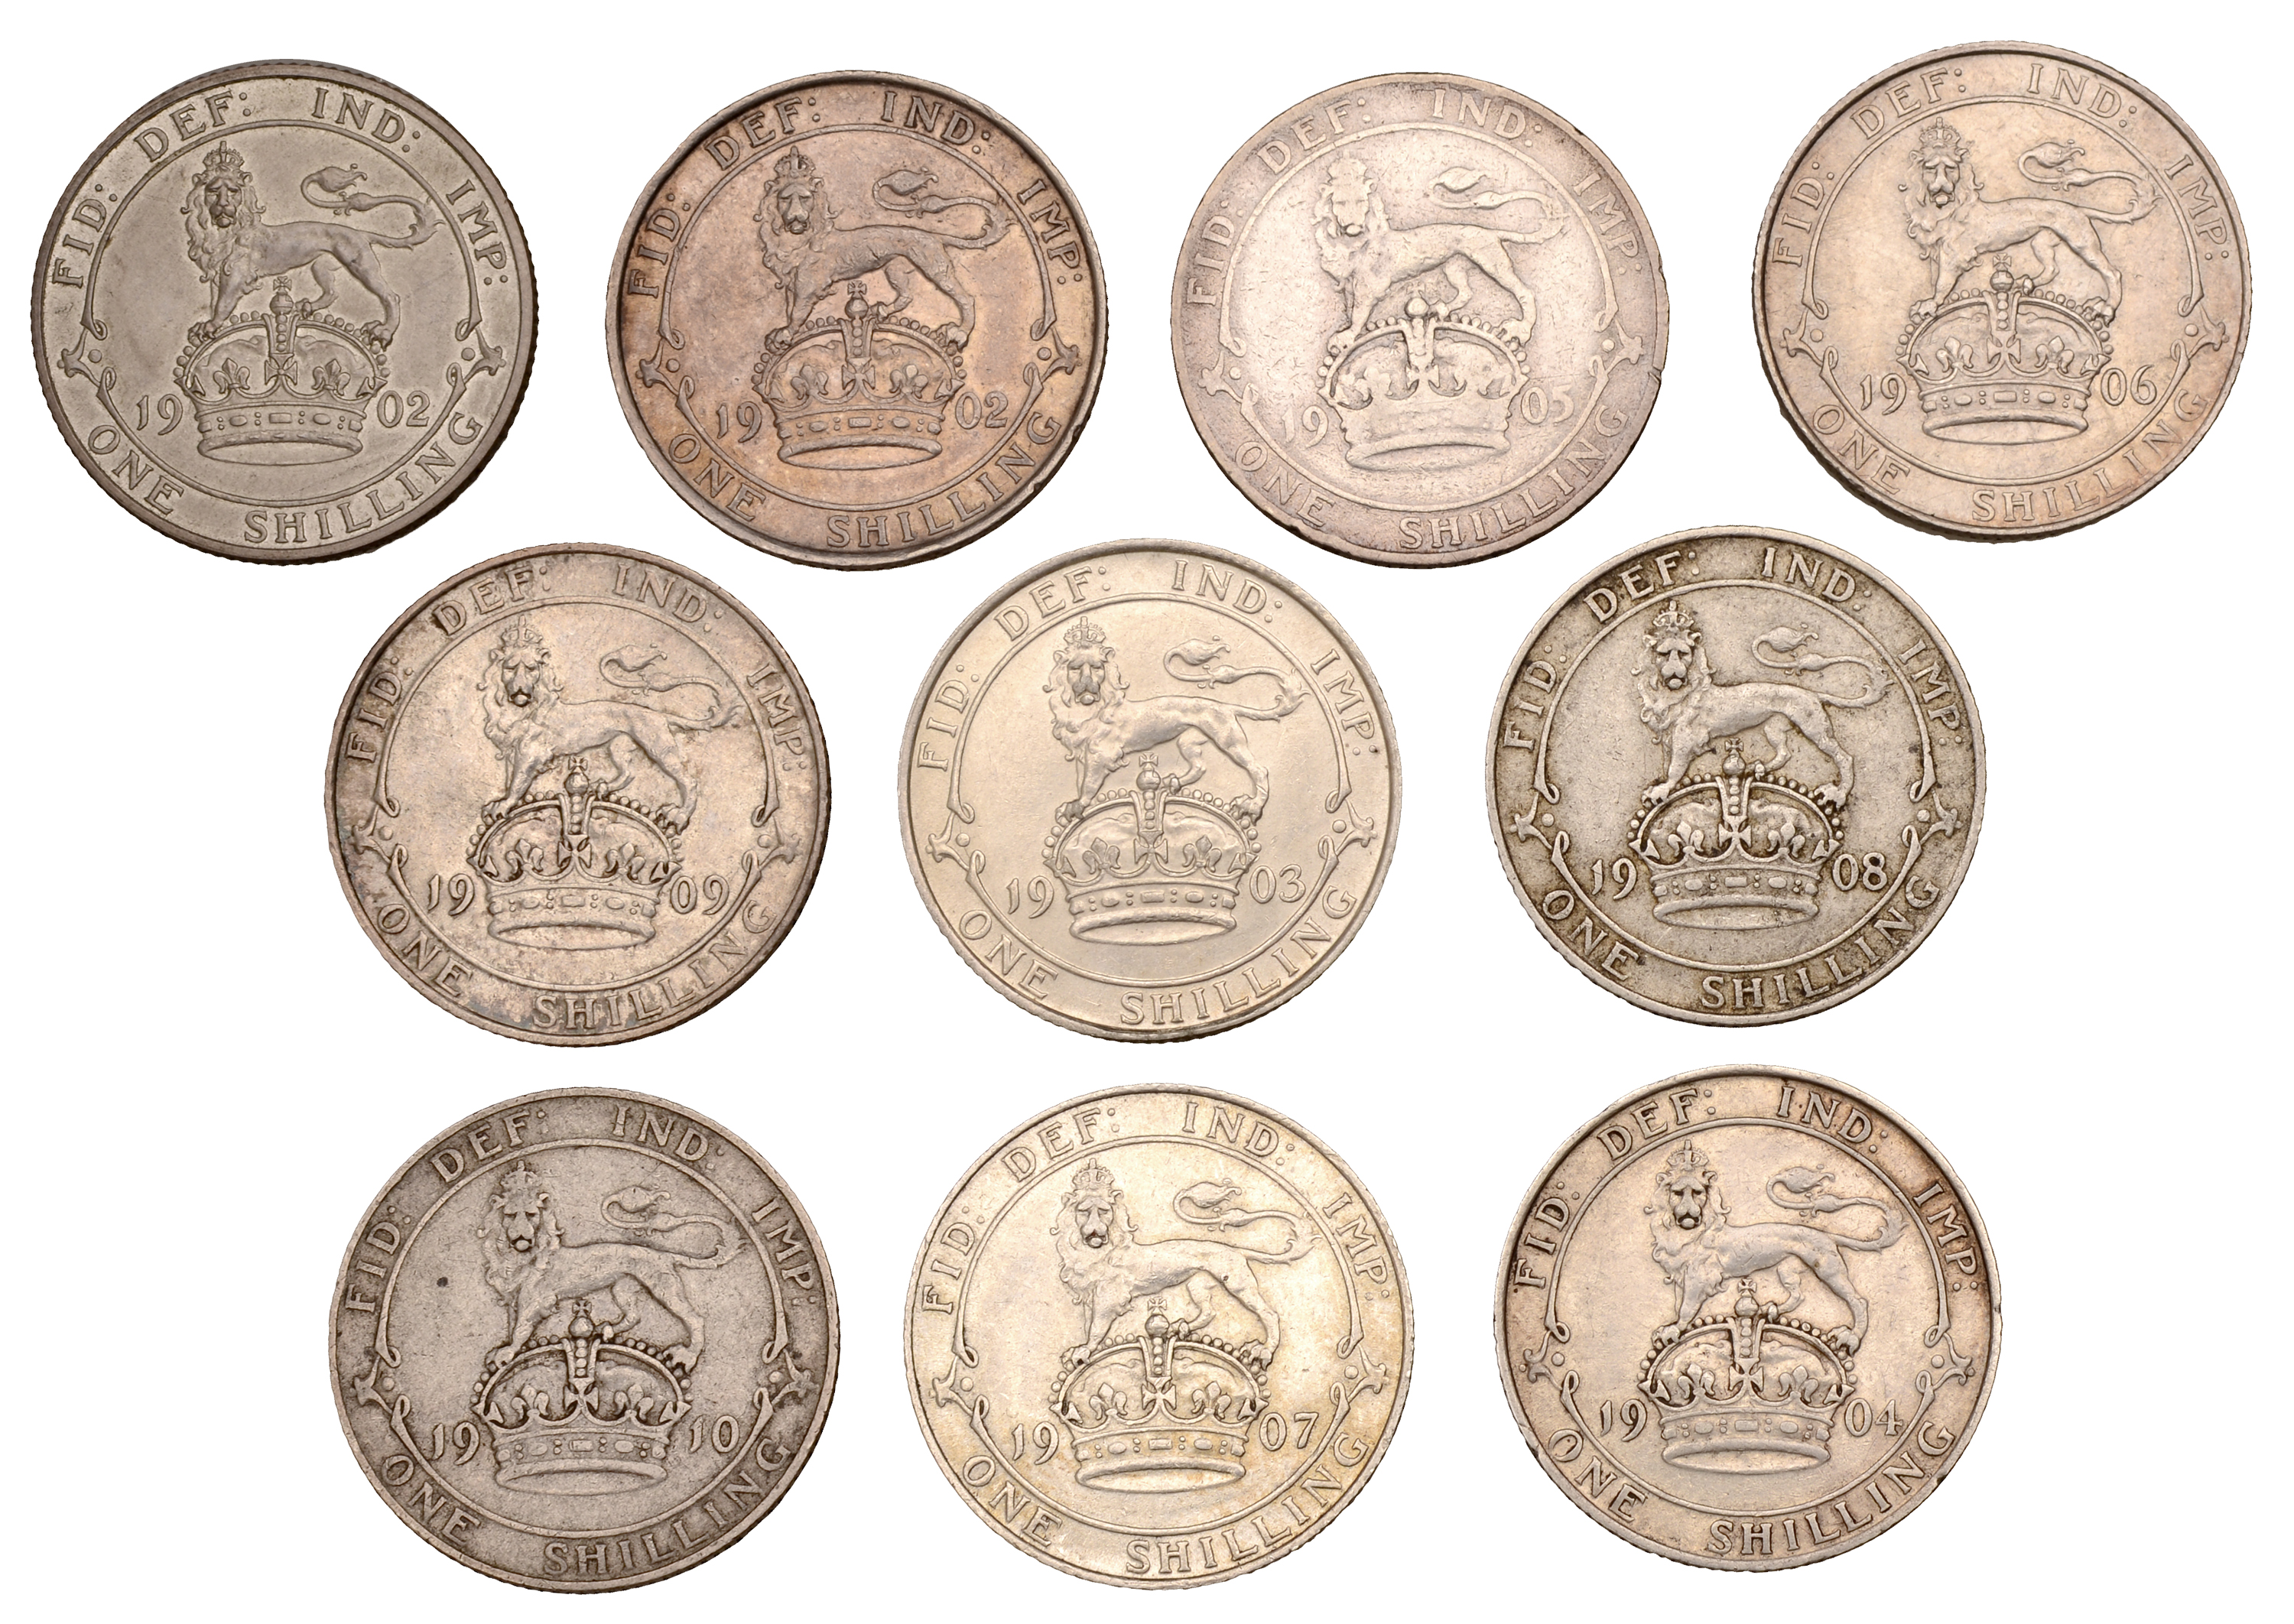 Edward VII, Shillings (10), 1902 (2, Proof and currency), 1903-1910 inclusive [10]. 1905, 19... - Image 2 of 2